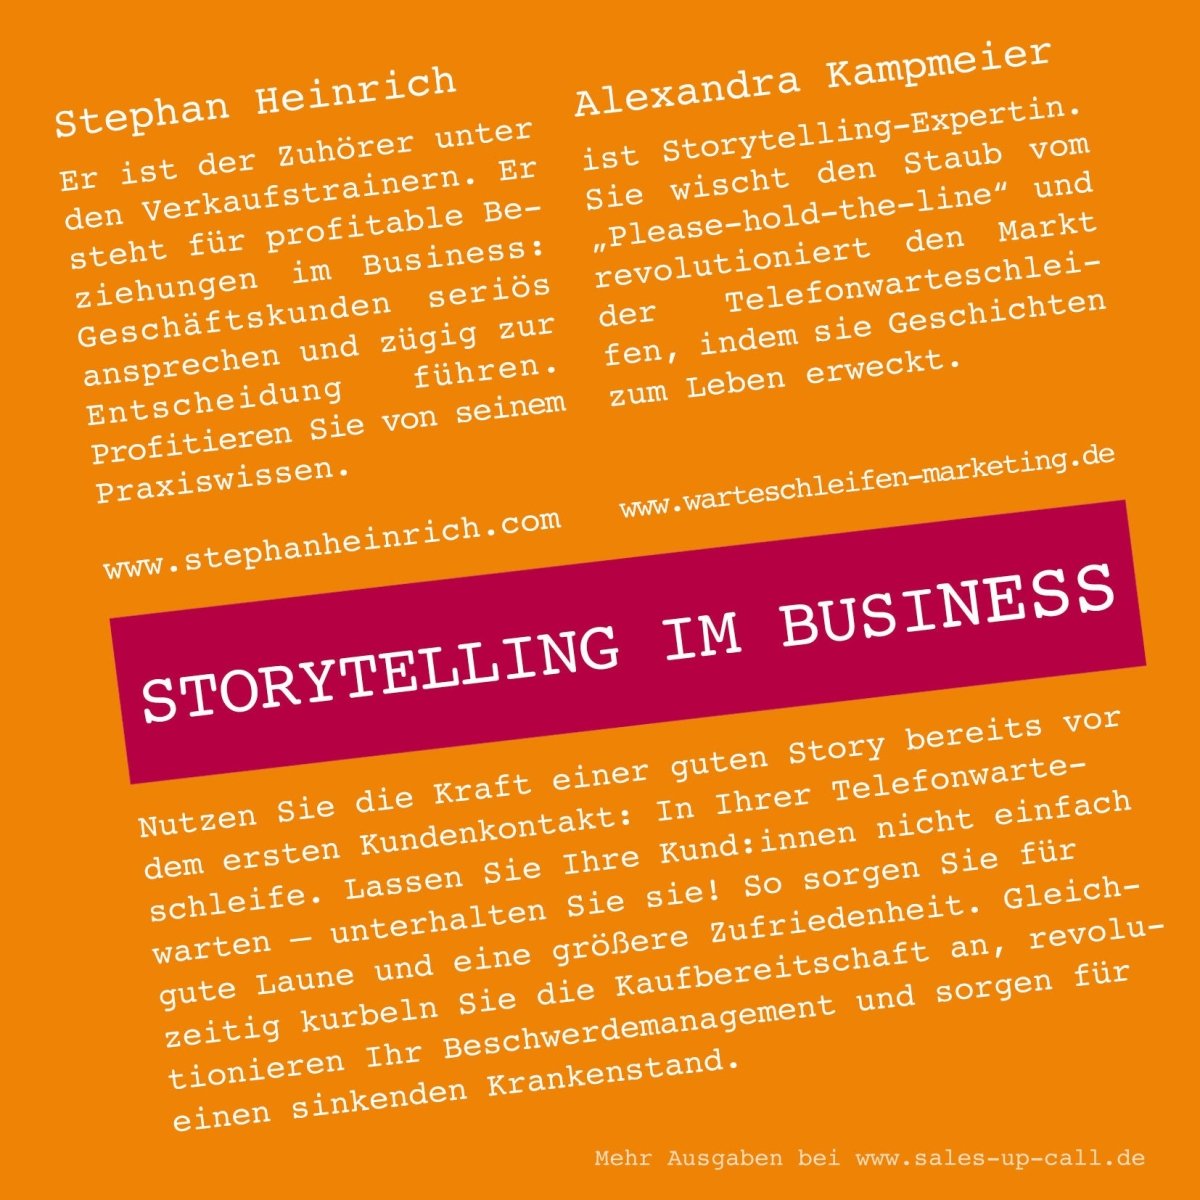 Storytelling im Business - Sales-up-Call - Stephan Heinrich